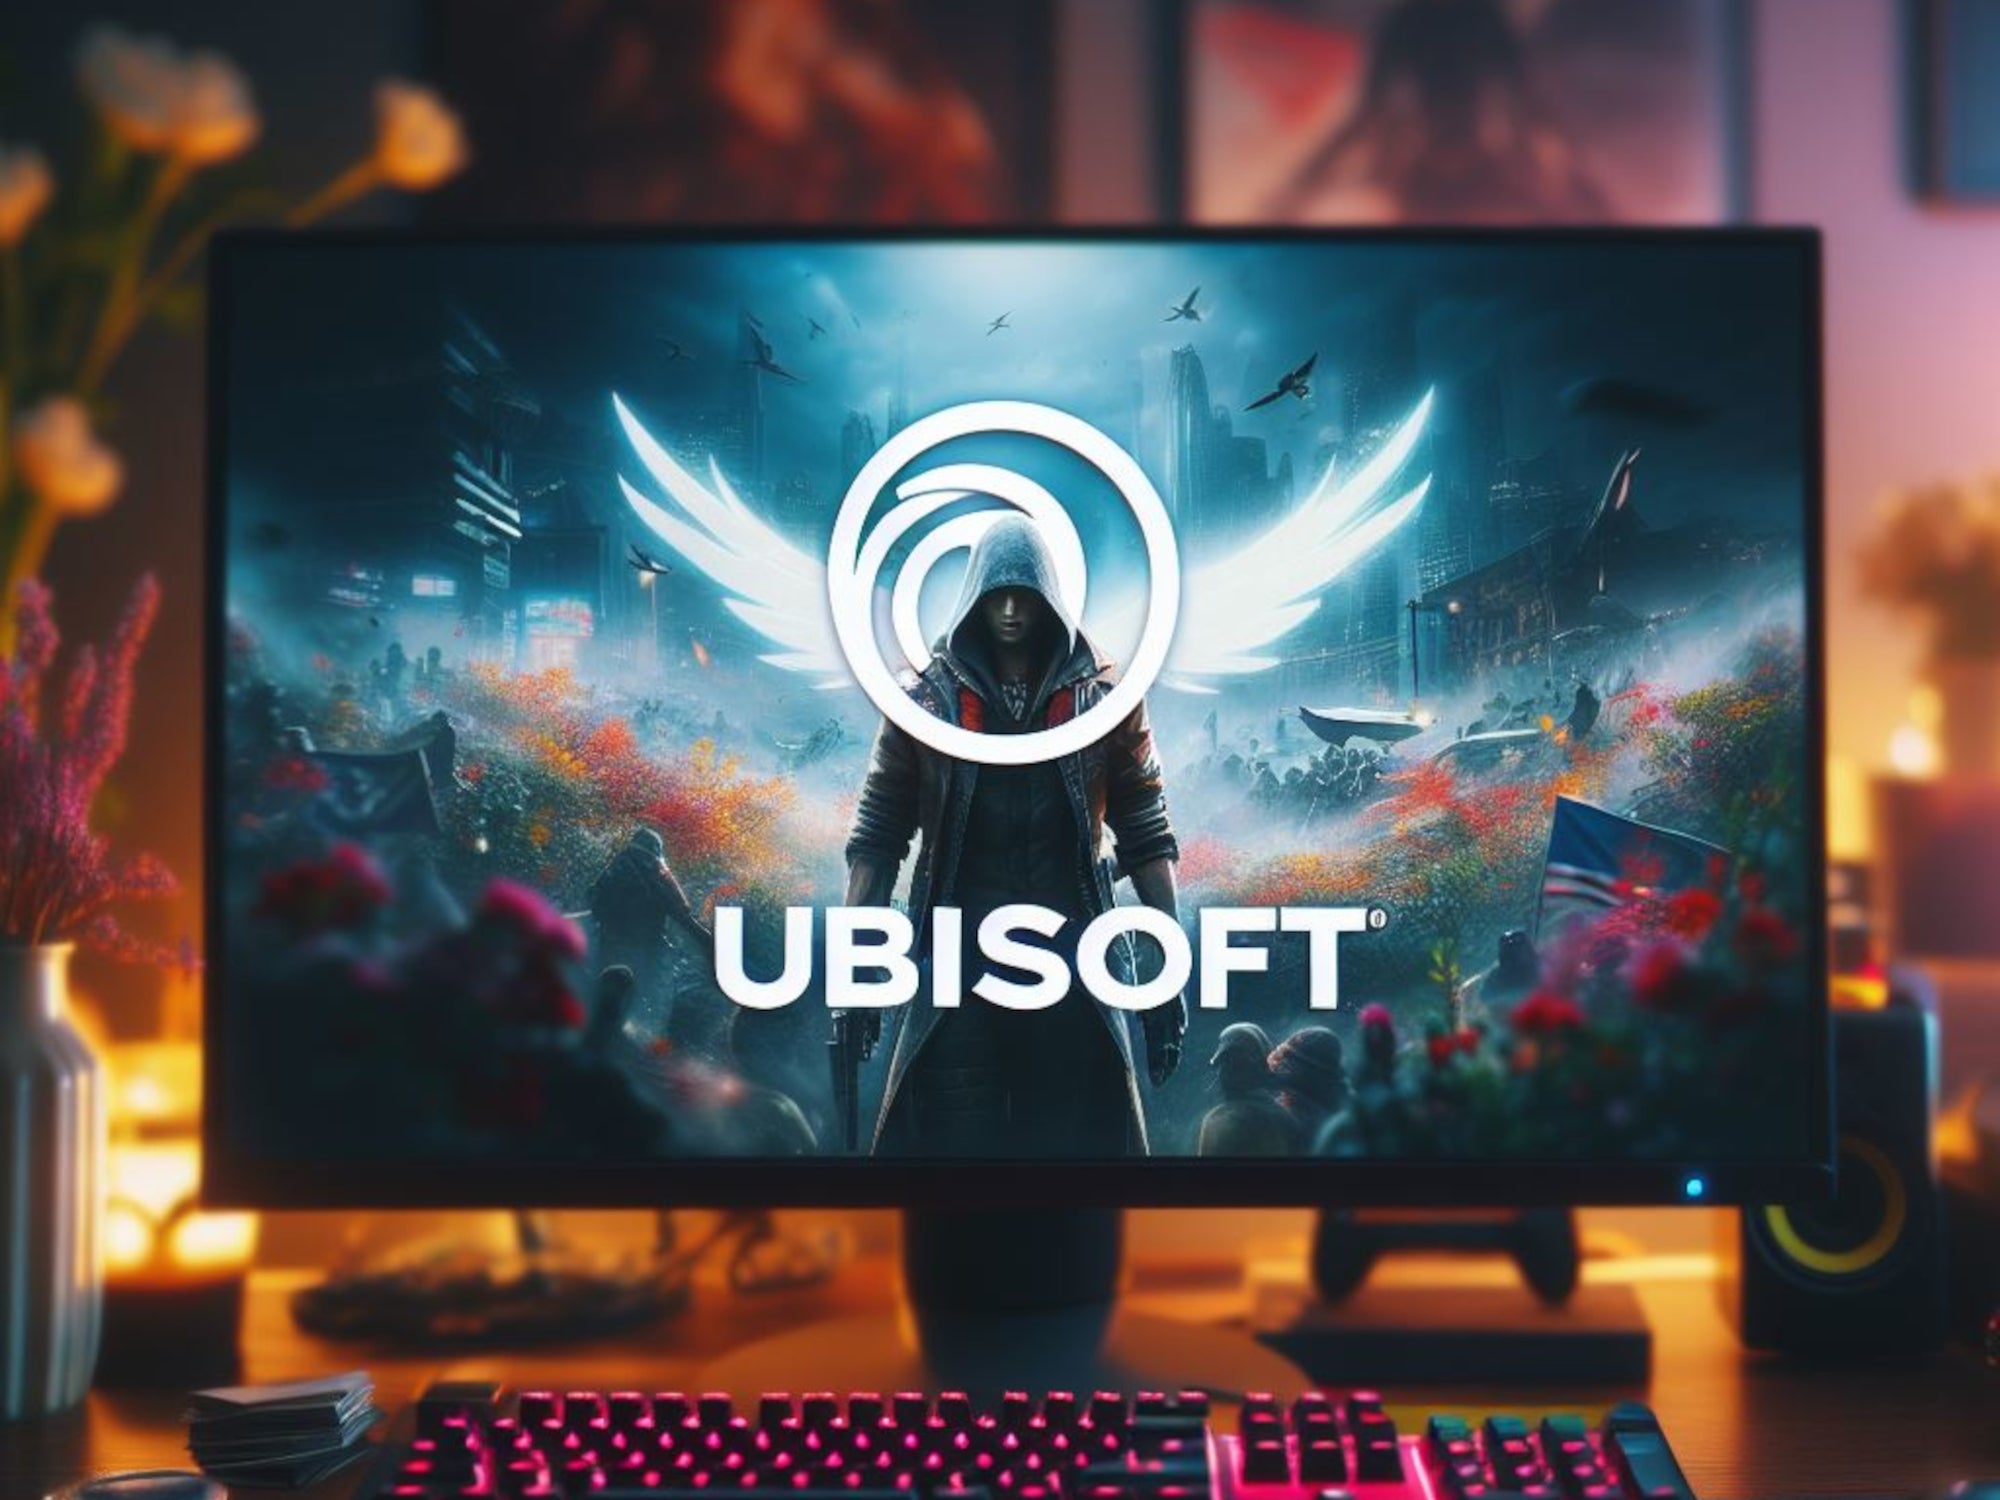 Ubisoft will finally be shutting down several games on January 25th